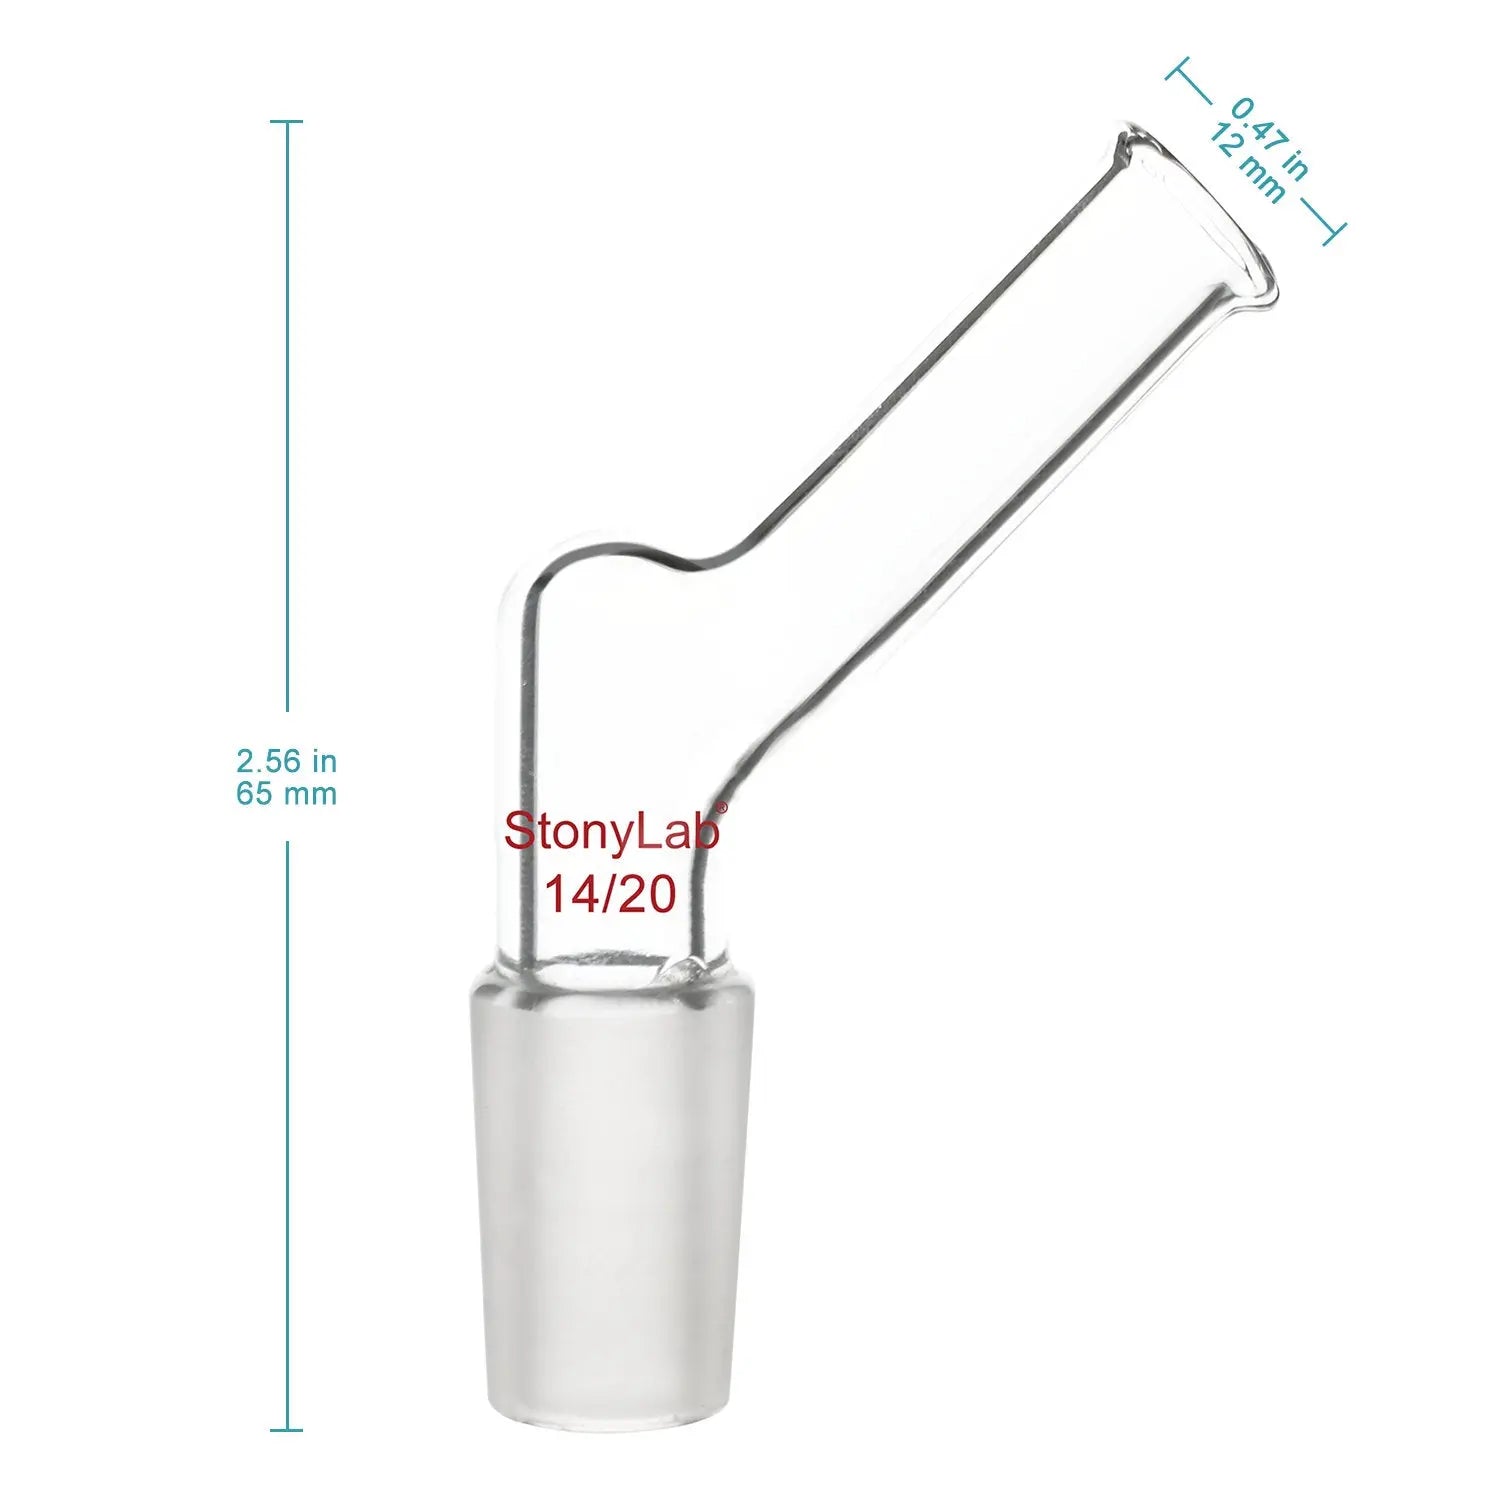 Borosilicate Glass Pour Out Adapter Adapters - Pouring